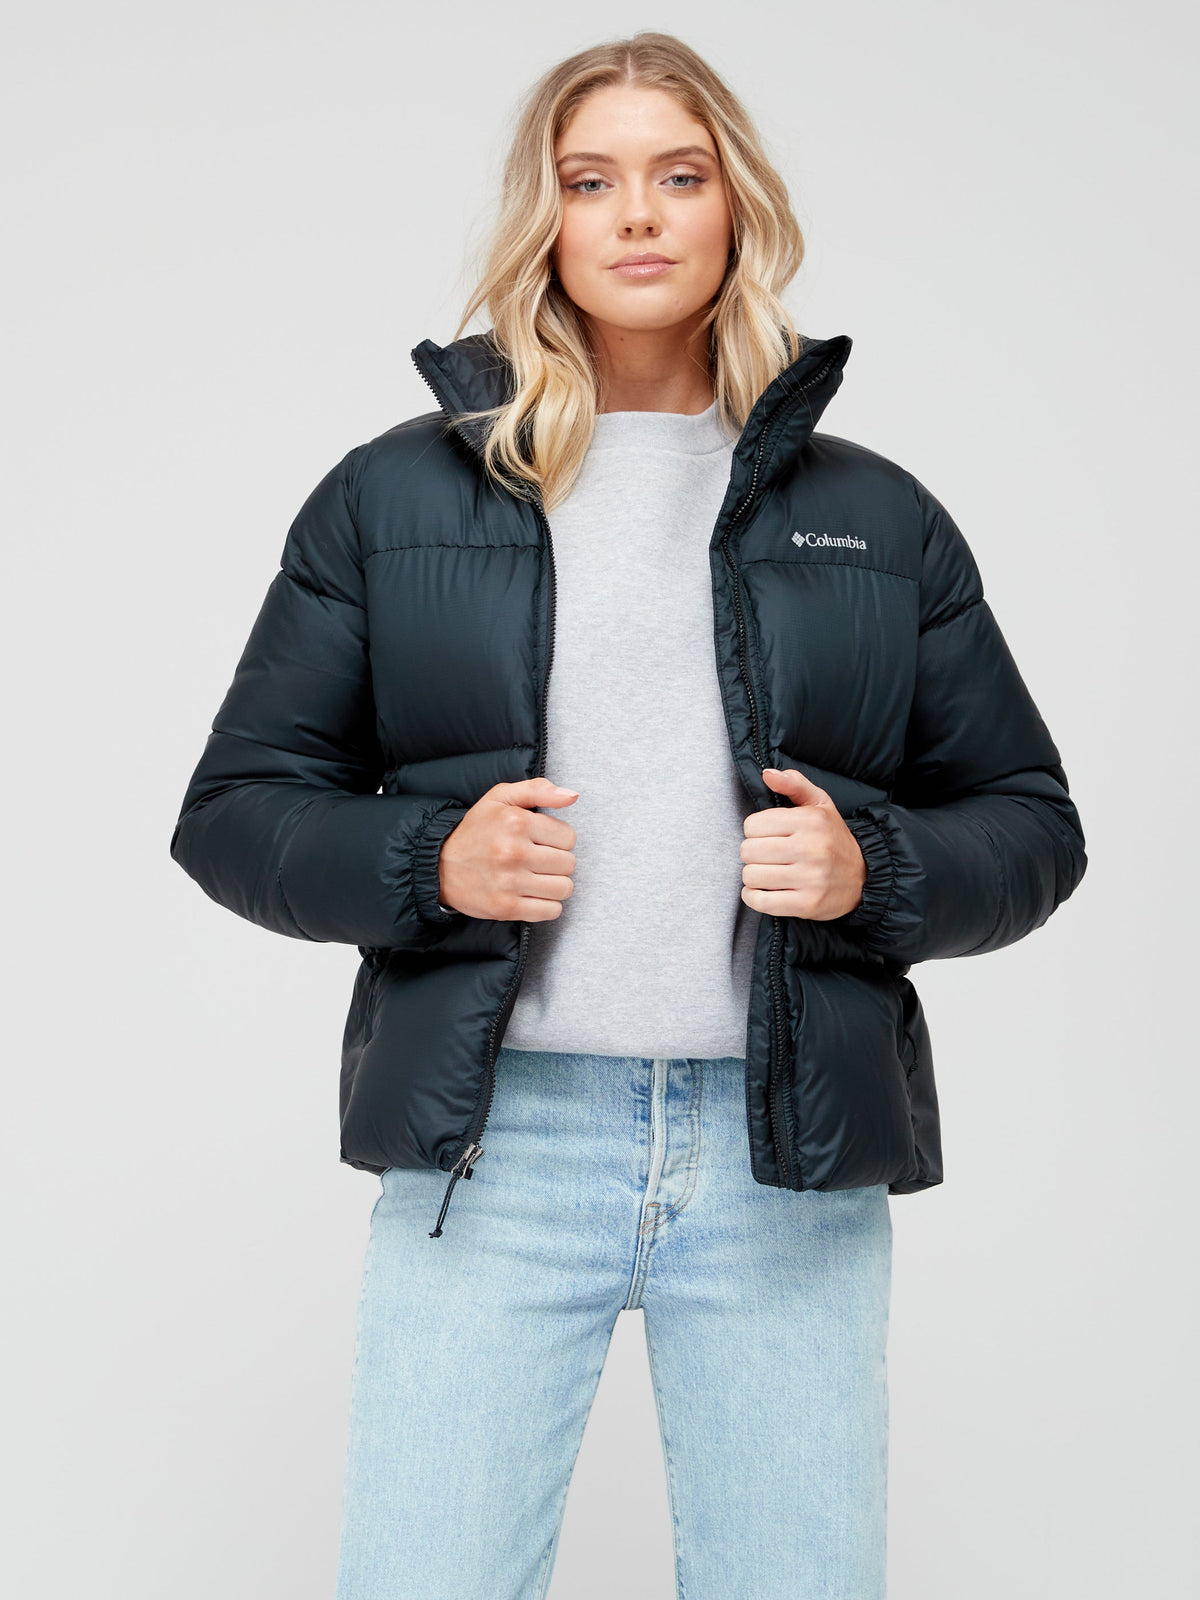 Womens Columbia Puffect Jacket in Black